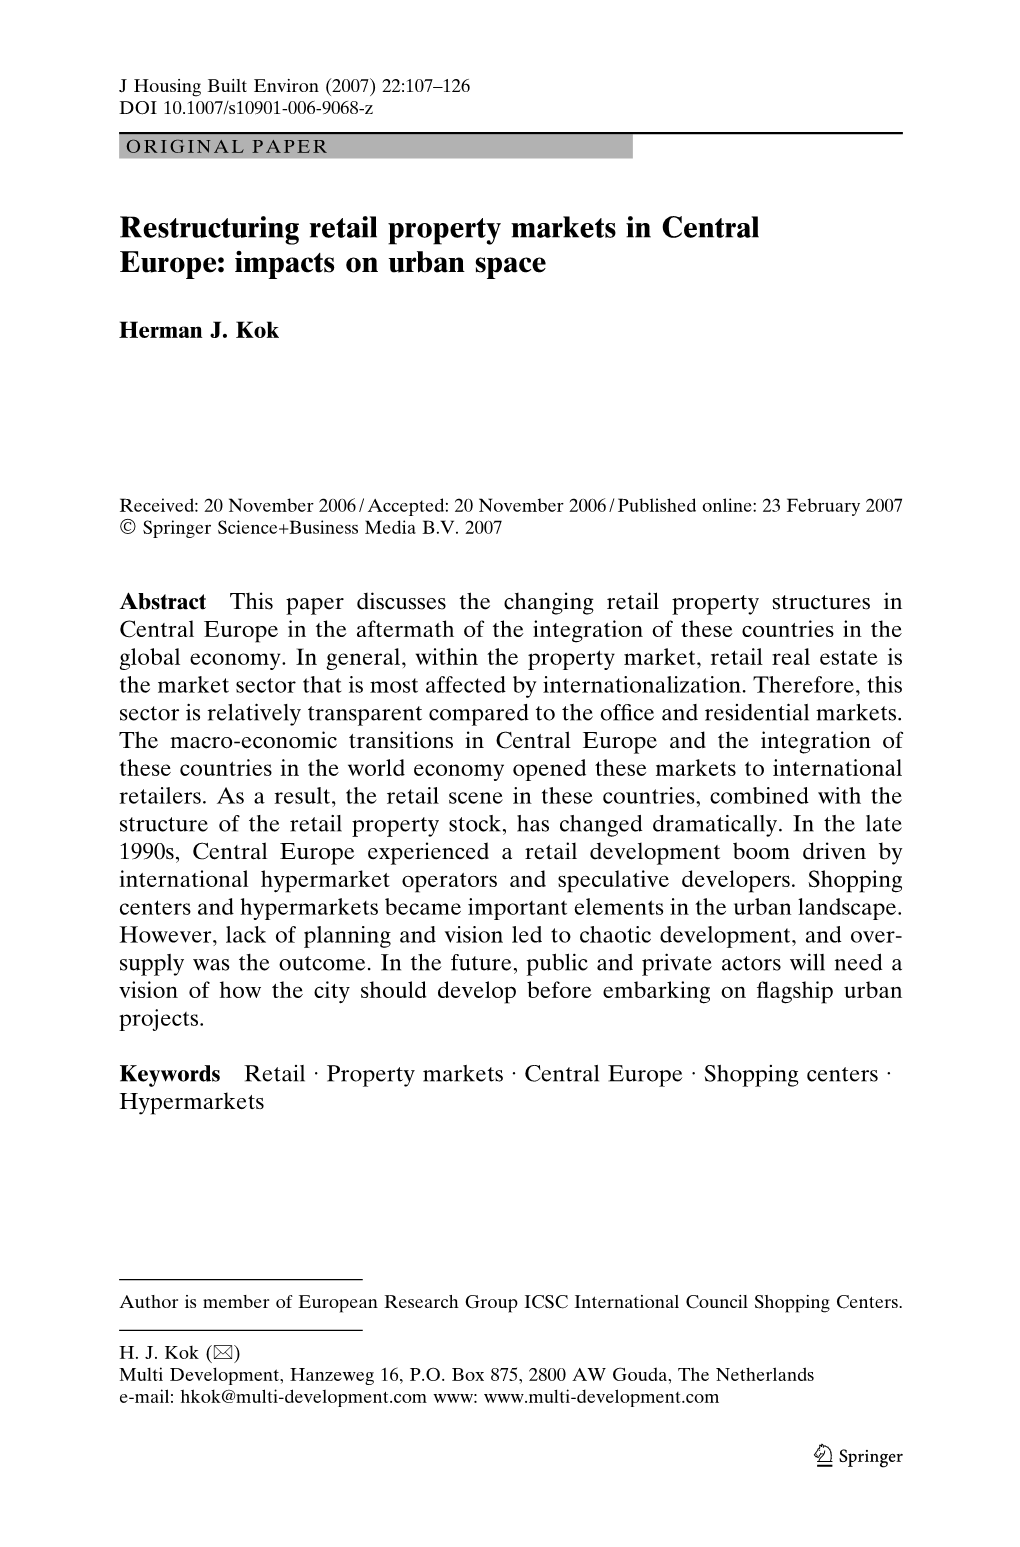 Restructuring Retail Property Markets in Central Europe: Impacts on Urban Space